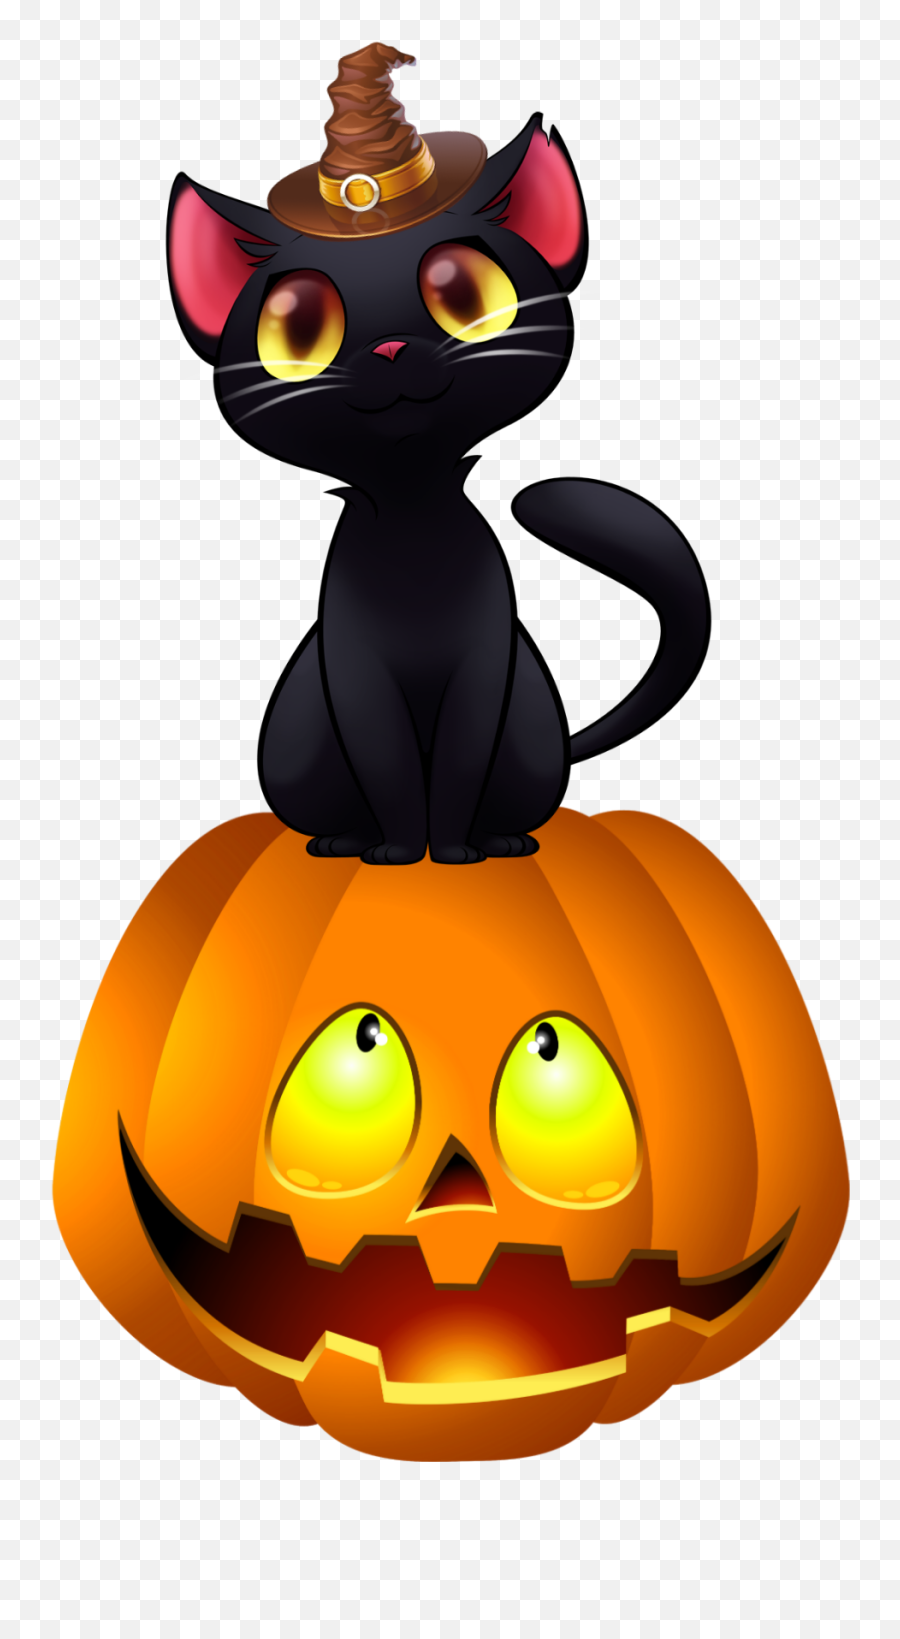 Halloween Cat Sticker By Bombaloounderpants - Witch Cat Emoji,Halloween Cat Emoji